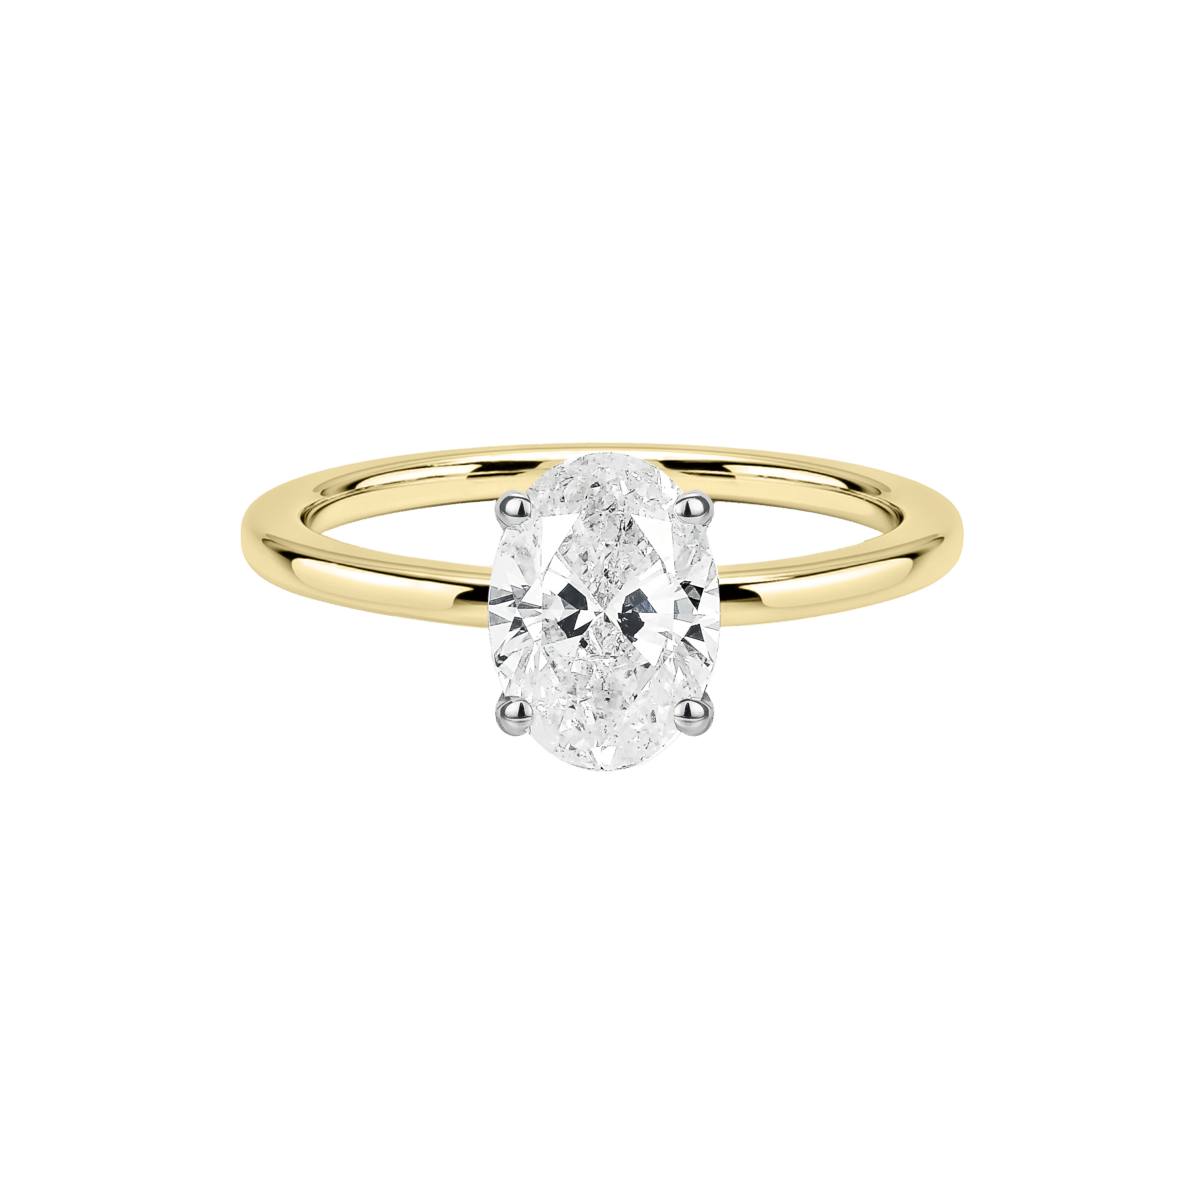 1ct Oval Diamond Engagement Ring